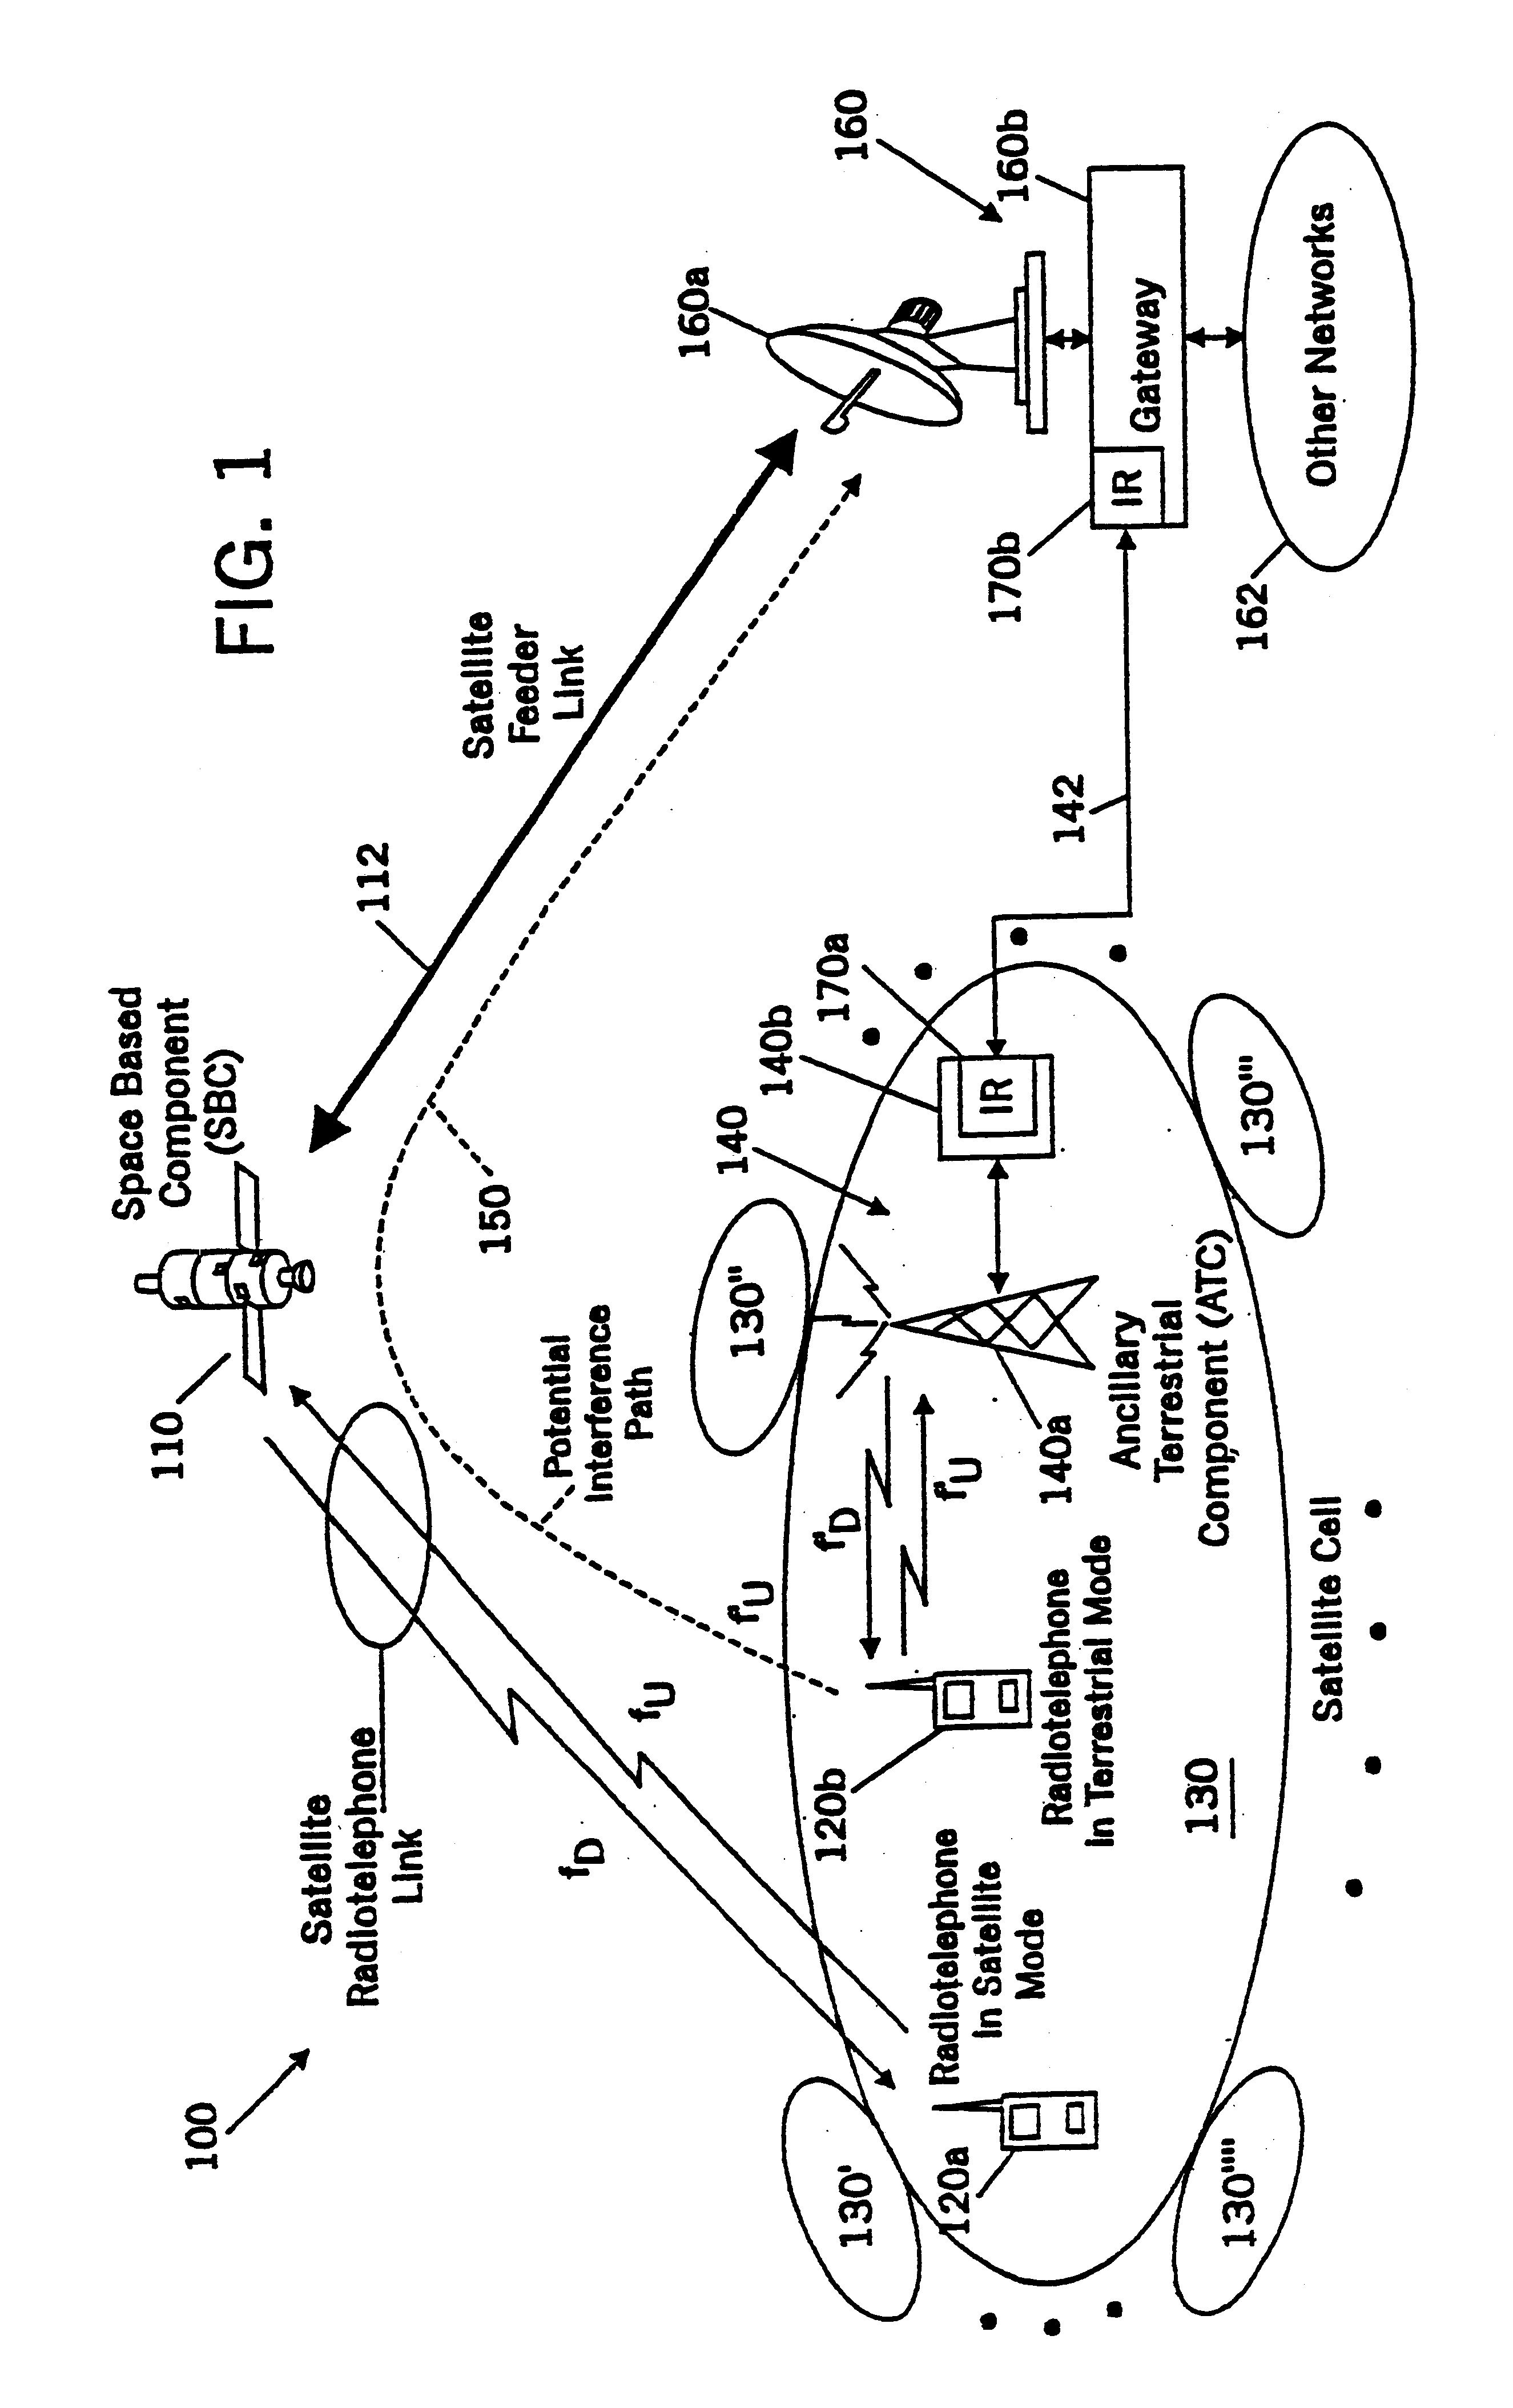 Filters for combined radiotelephone/GPS terminals